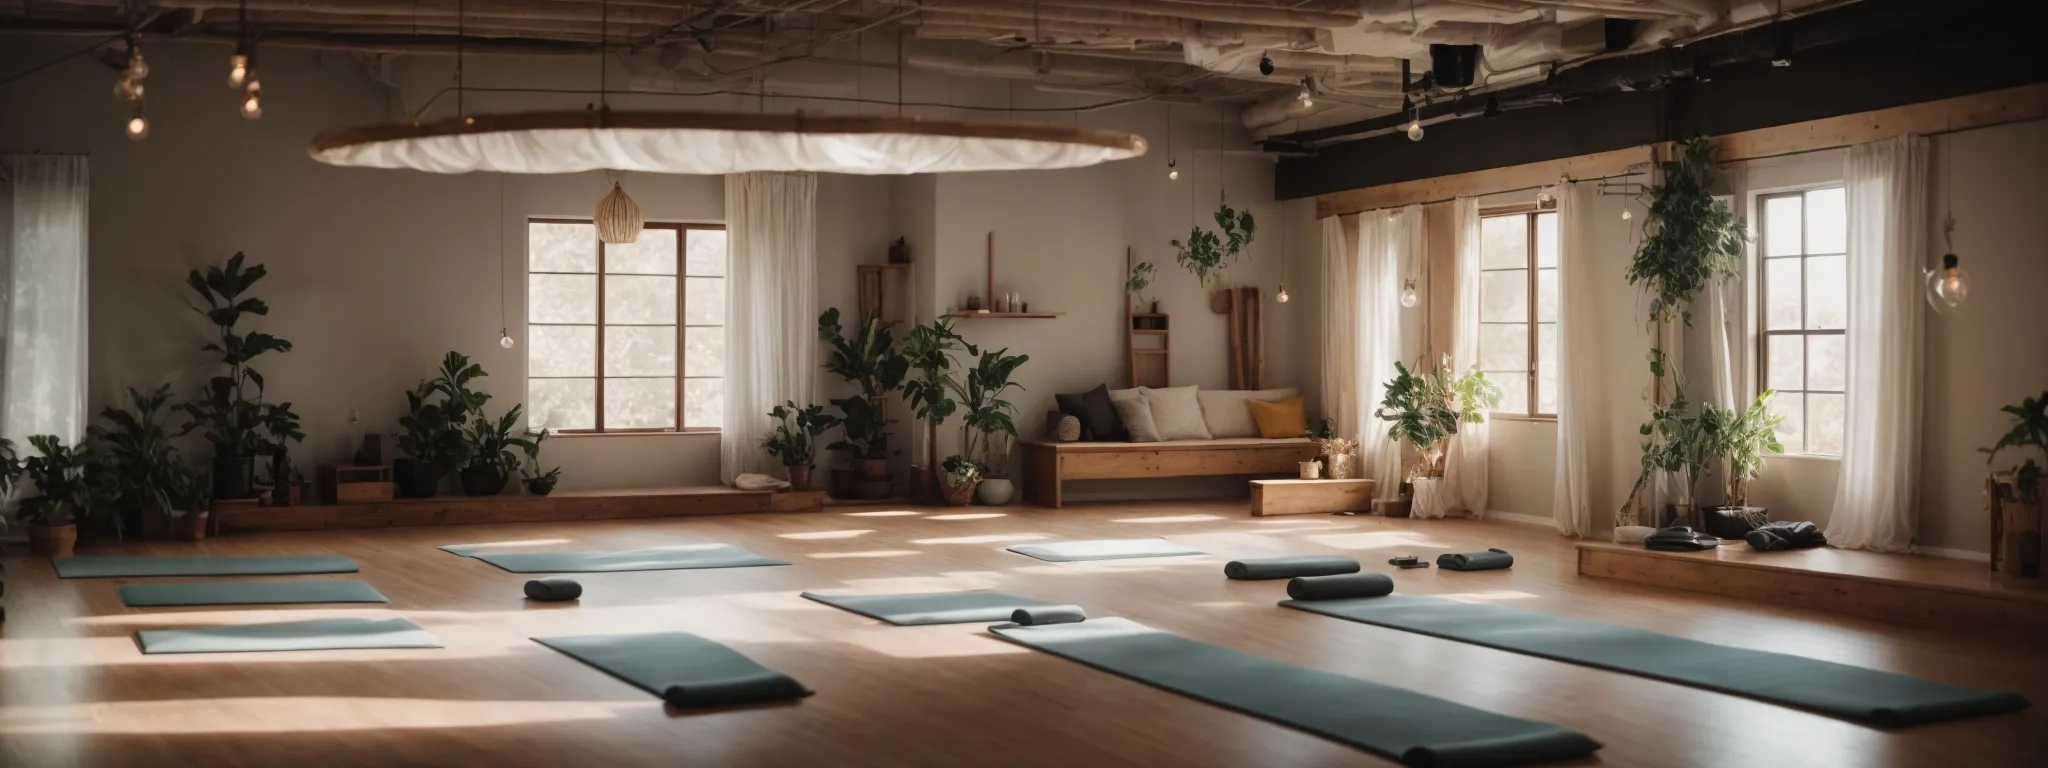 a serene studio filled with yoga mats, tranquil lighting, and a harmonious ambiance inviting virtual connection.